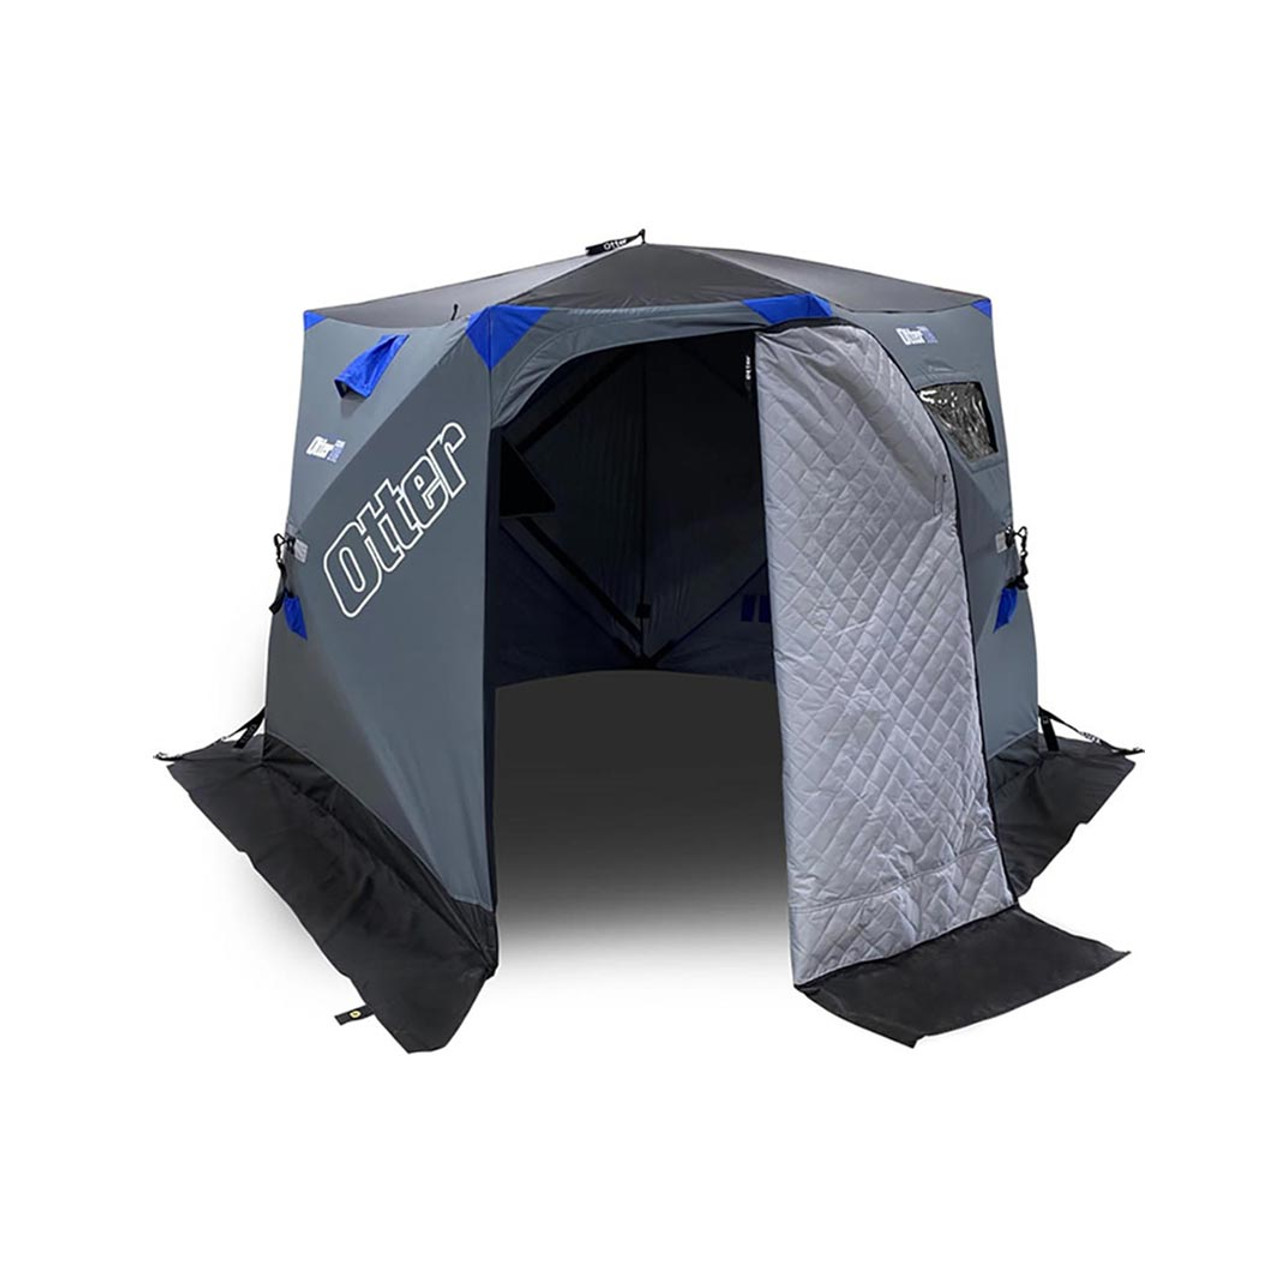 Otter Outdoors on Instagram: X-Over Shelters - The Pinnacle of Design and  Performance. Rich with cutting edge design and features that will enhance  any ice fishing experience. Front and side access doors